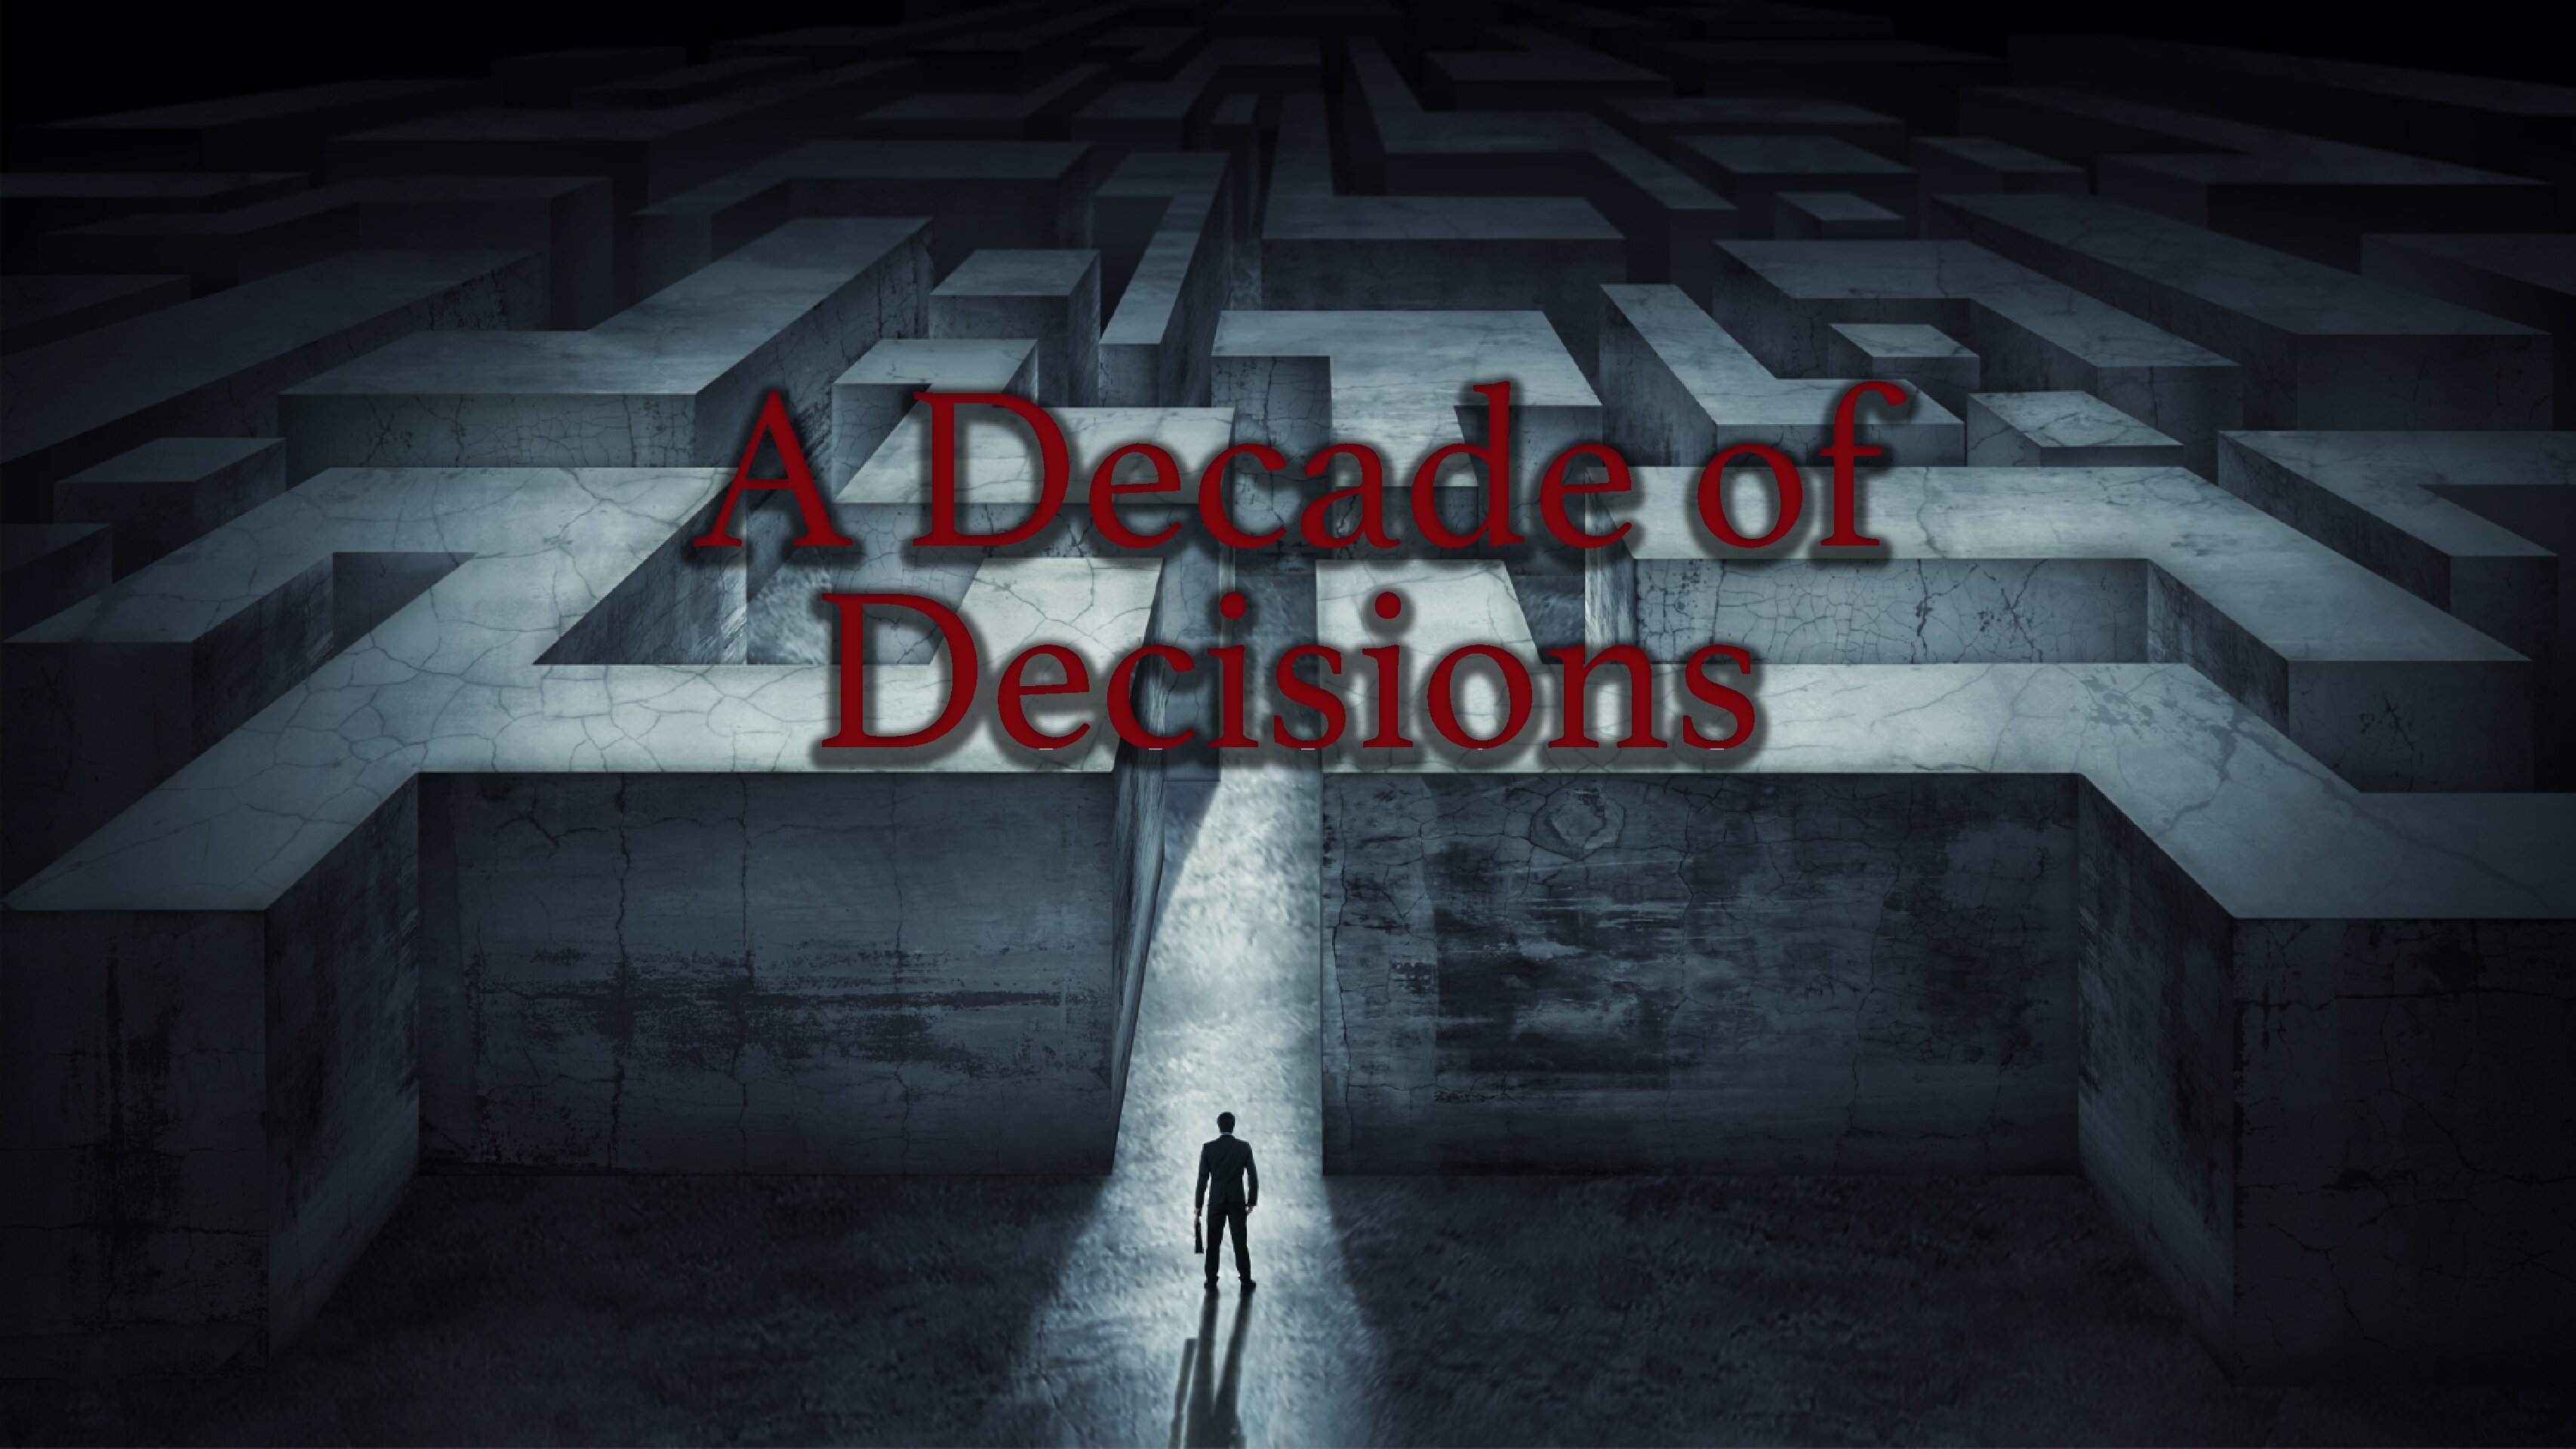 A Decade of Decisions